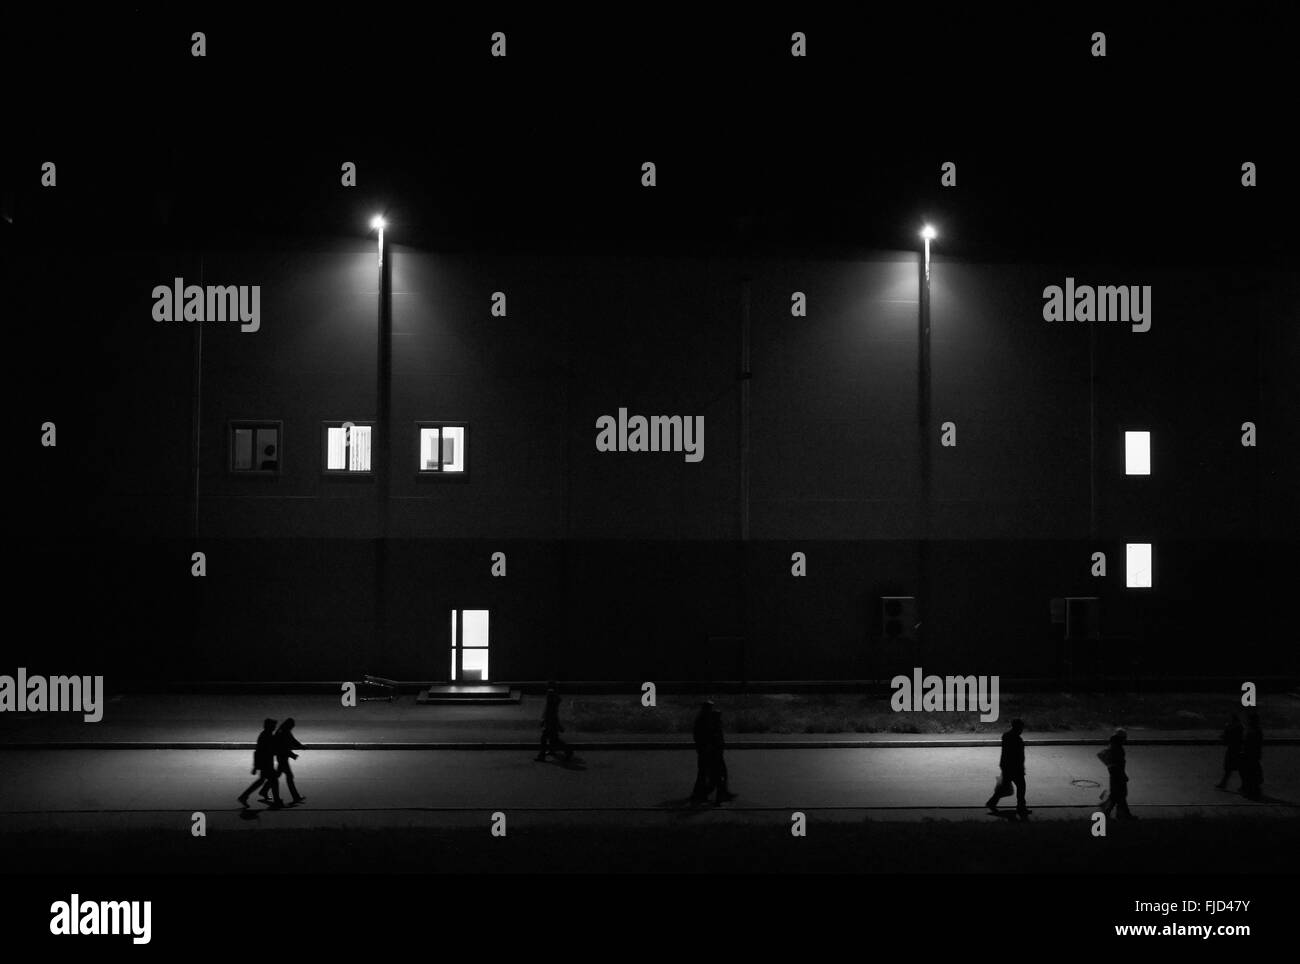 People walking on the night street with streetlights against the building with luminous windows Stock Photo